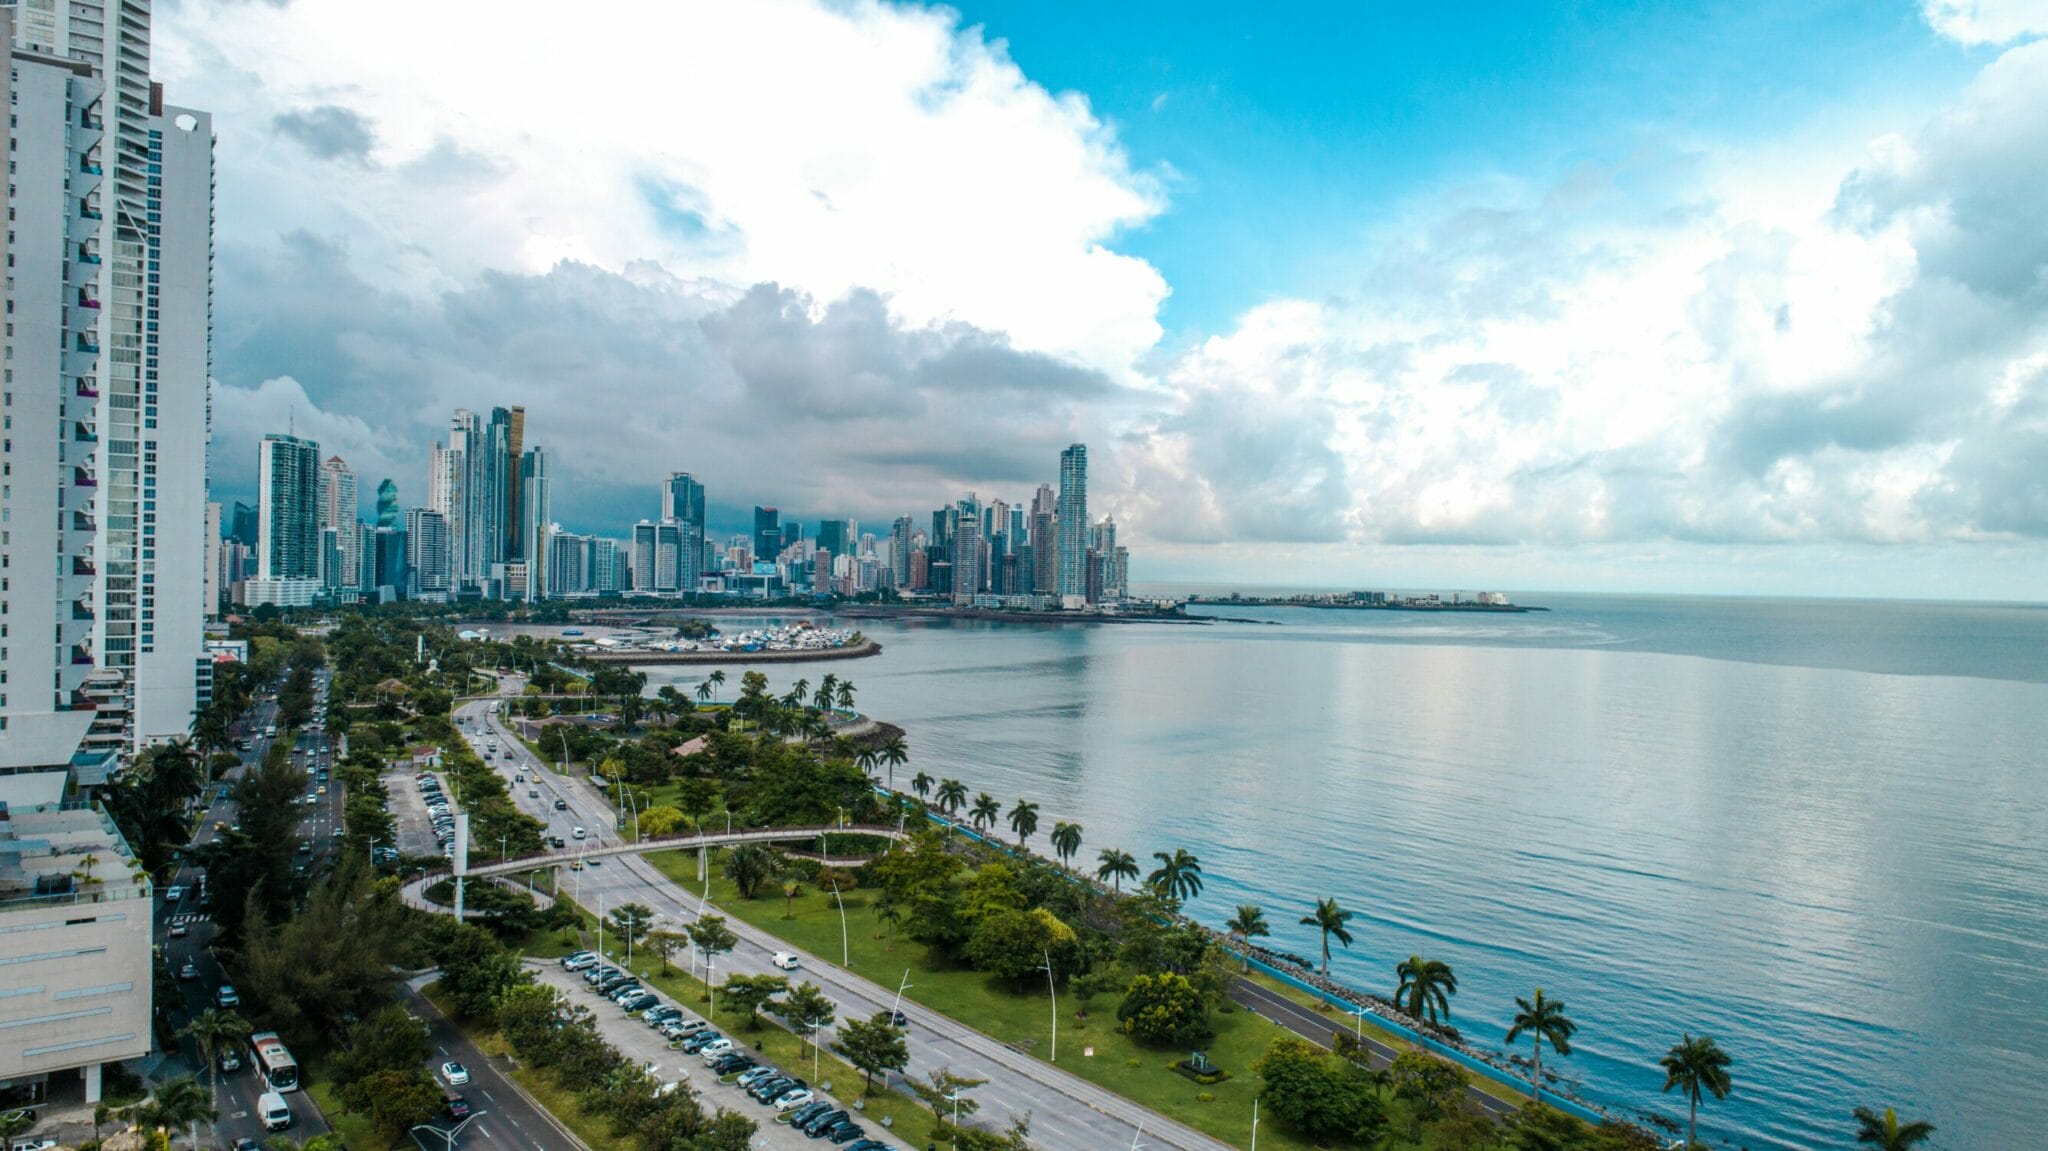 11 things to do in Panama City (Panama) - Flytrippers